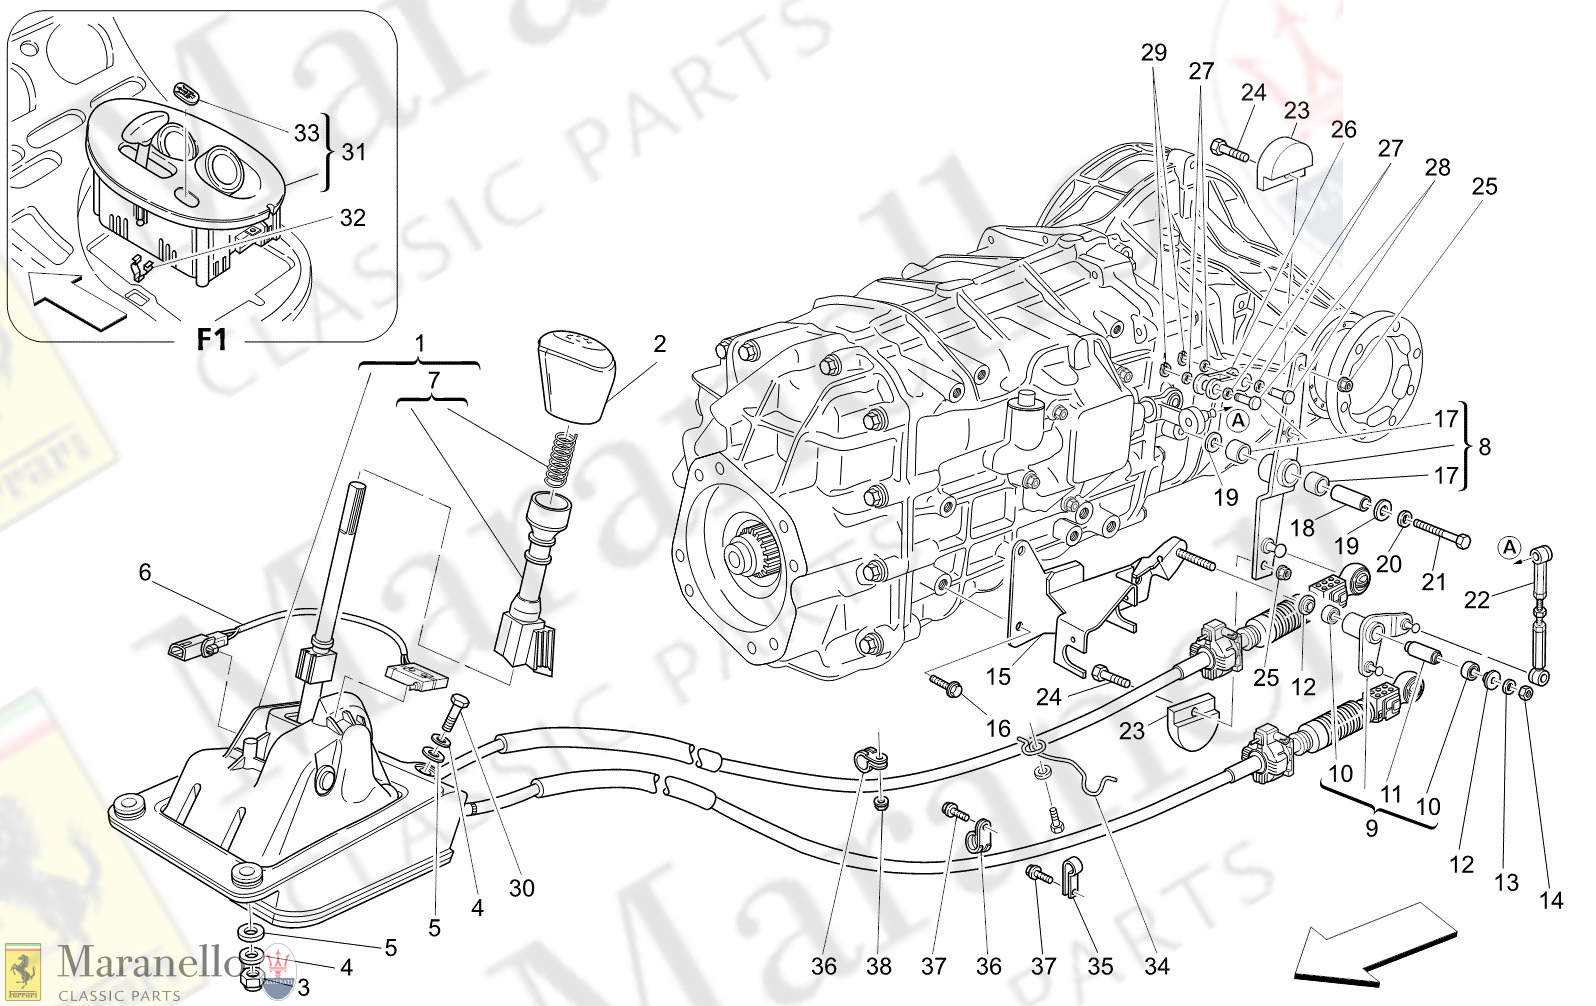 M3.03 - 12 - M303 - 12 Driver Controls For Gearbox